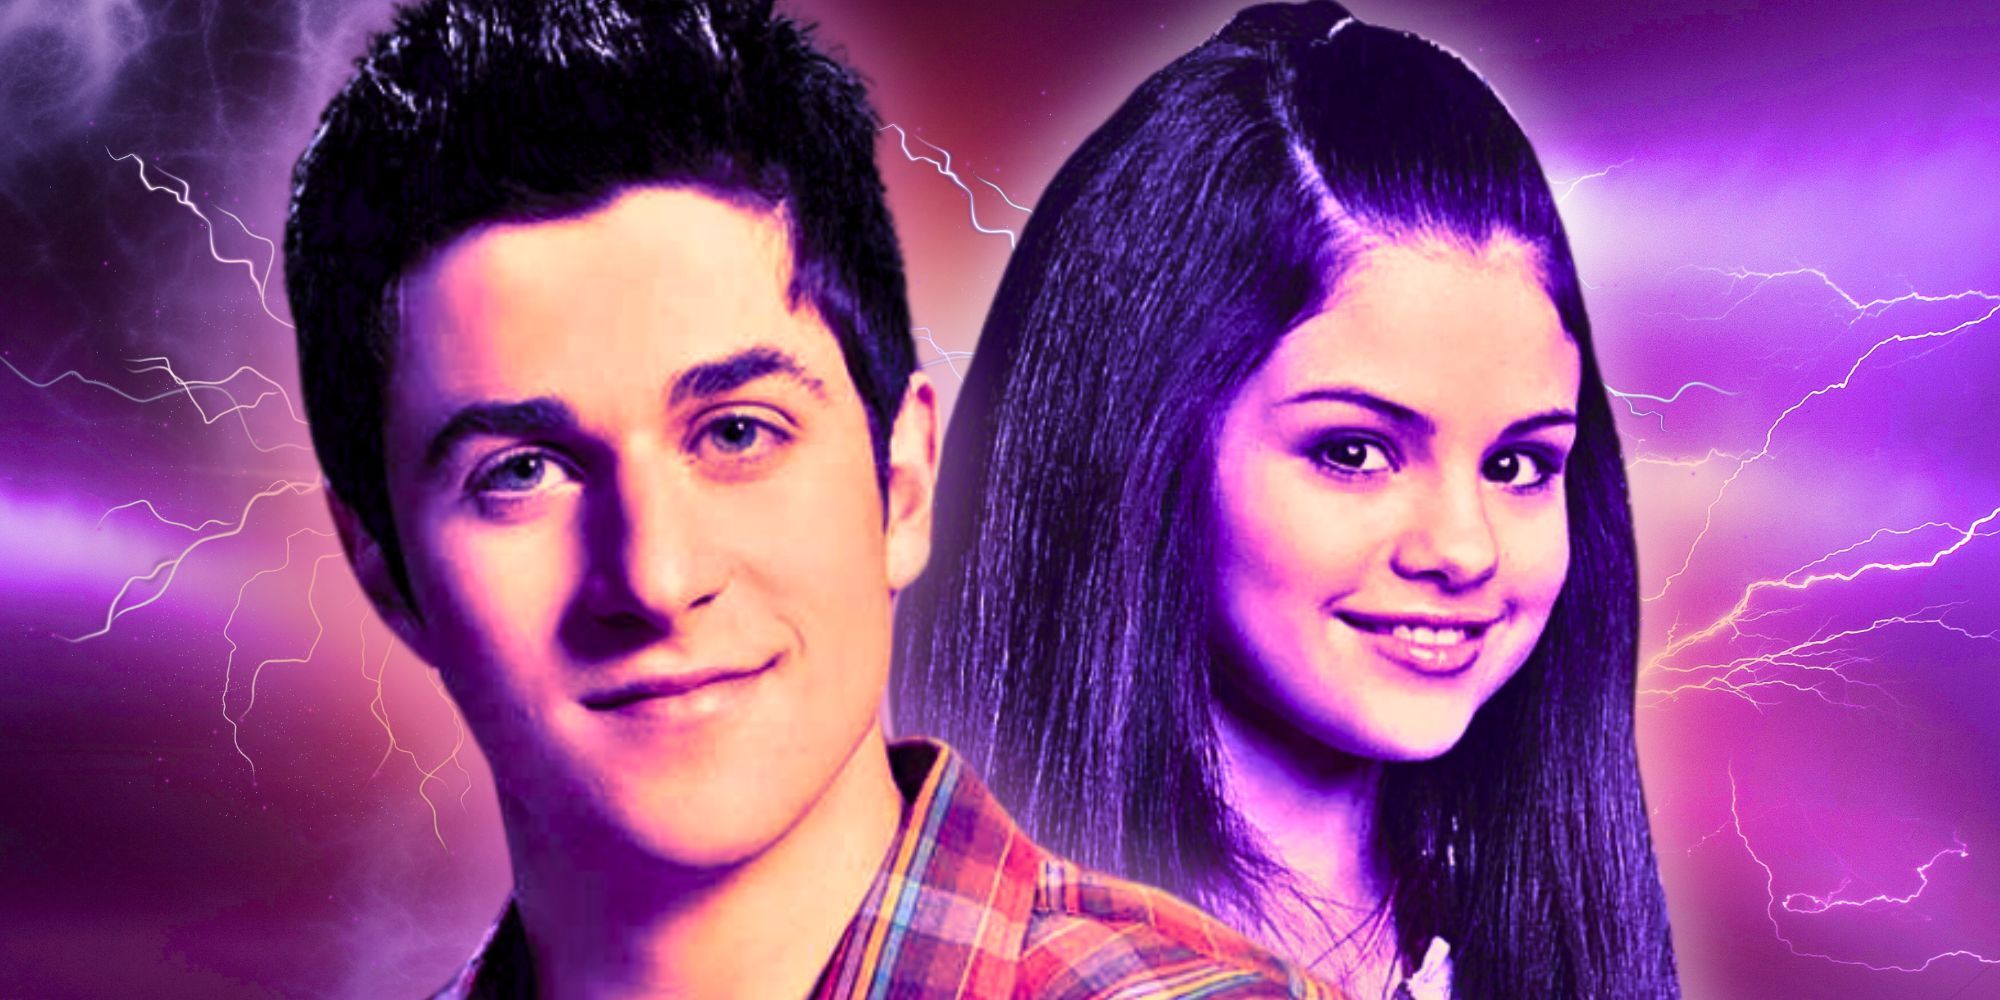 David Henrie and Selena Gomez as Justin and Alex from Wizards of Waverly Place